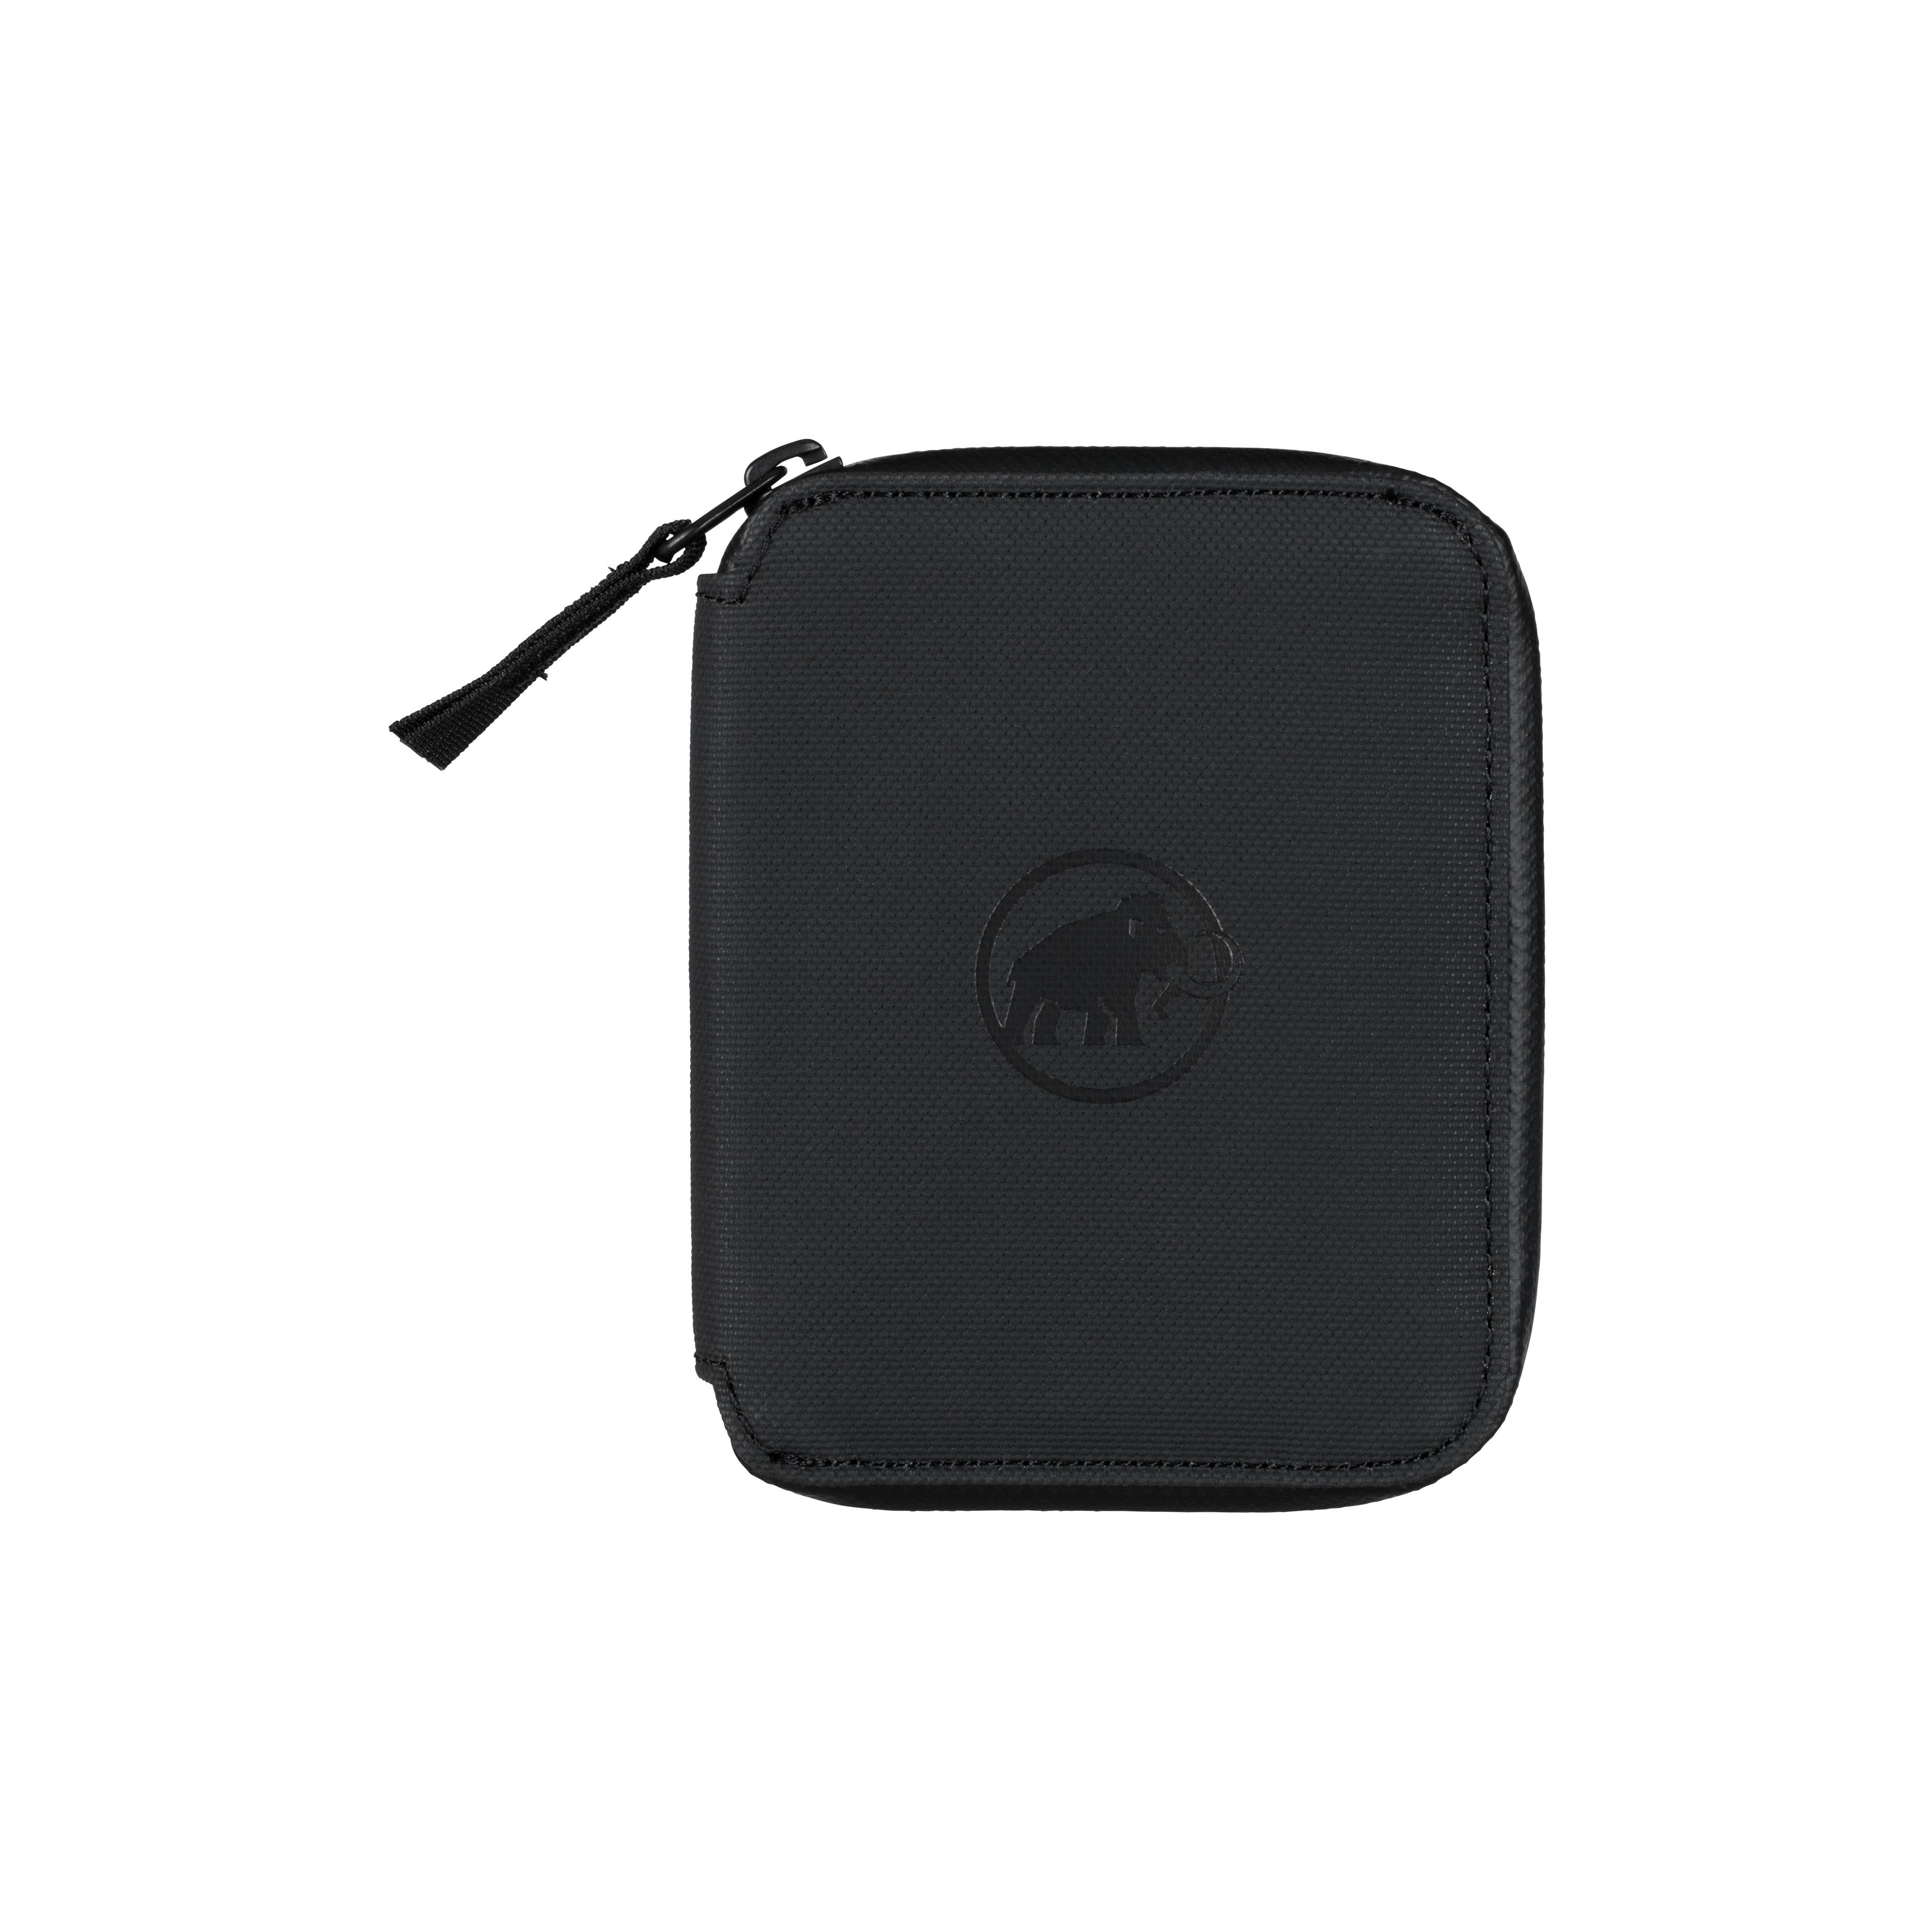 Seon Zip Wallet - black, one size product image